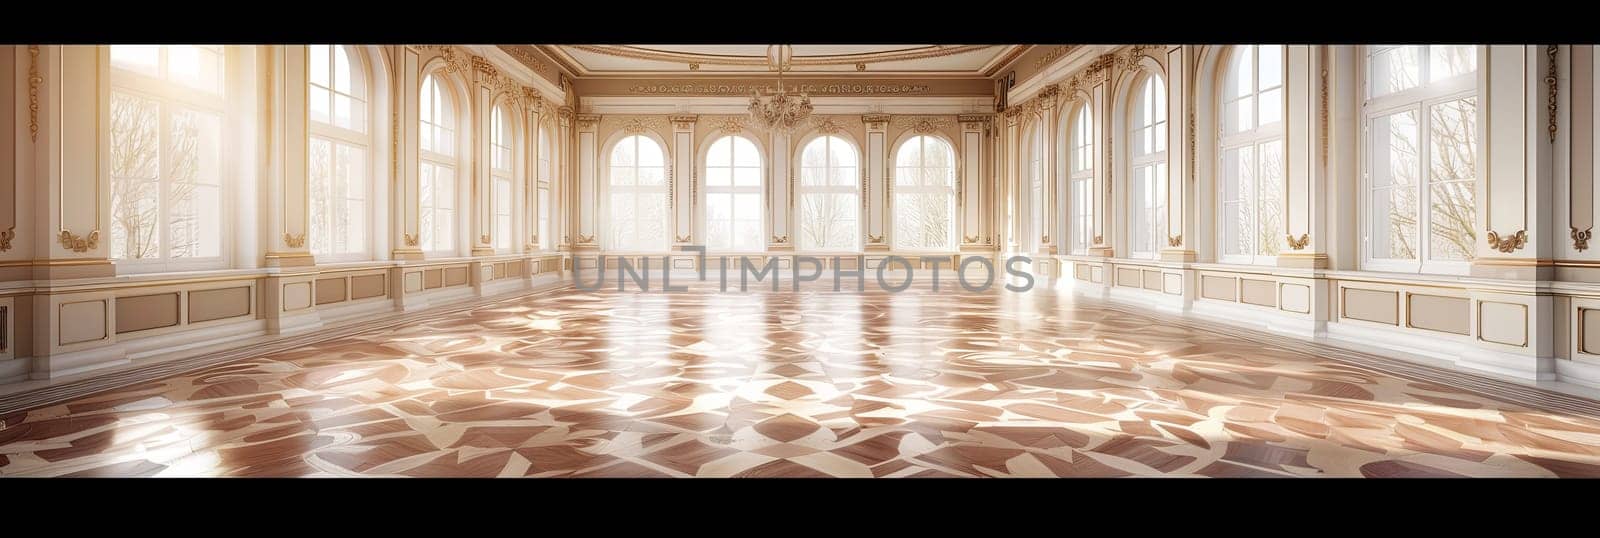 Vintage-style banquet hall with a checkered parquet floor and expansive windows.